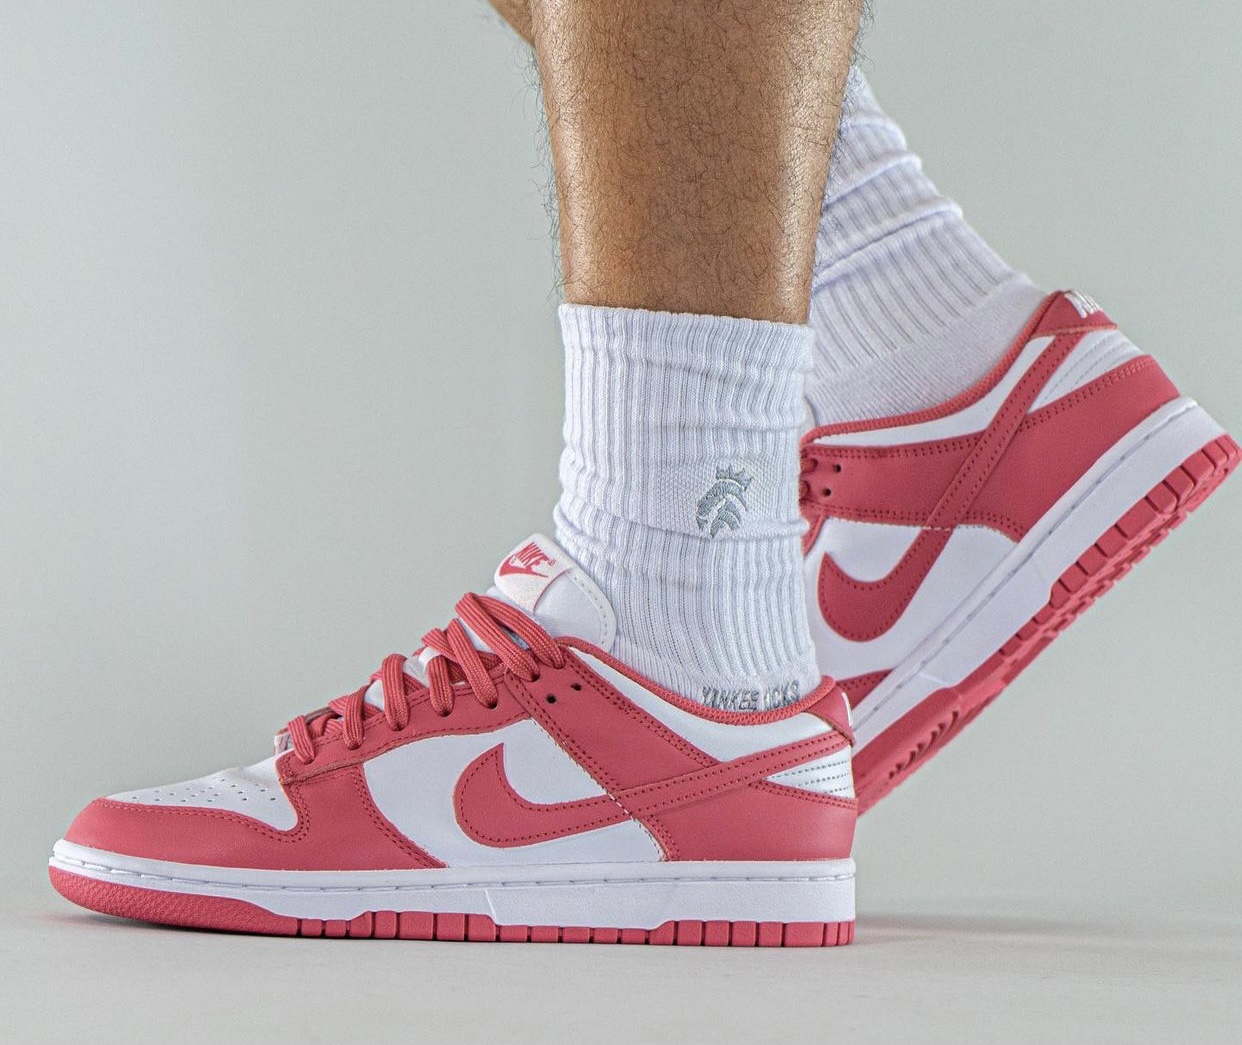 Nike Dunk Low Archeo Pink White DD1503 111 Release Date 4